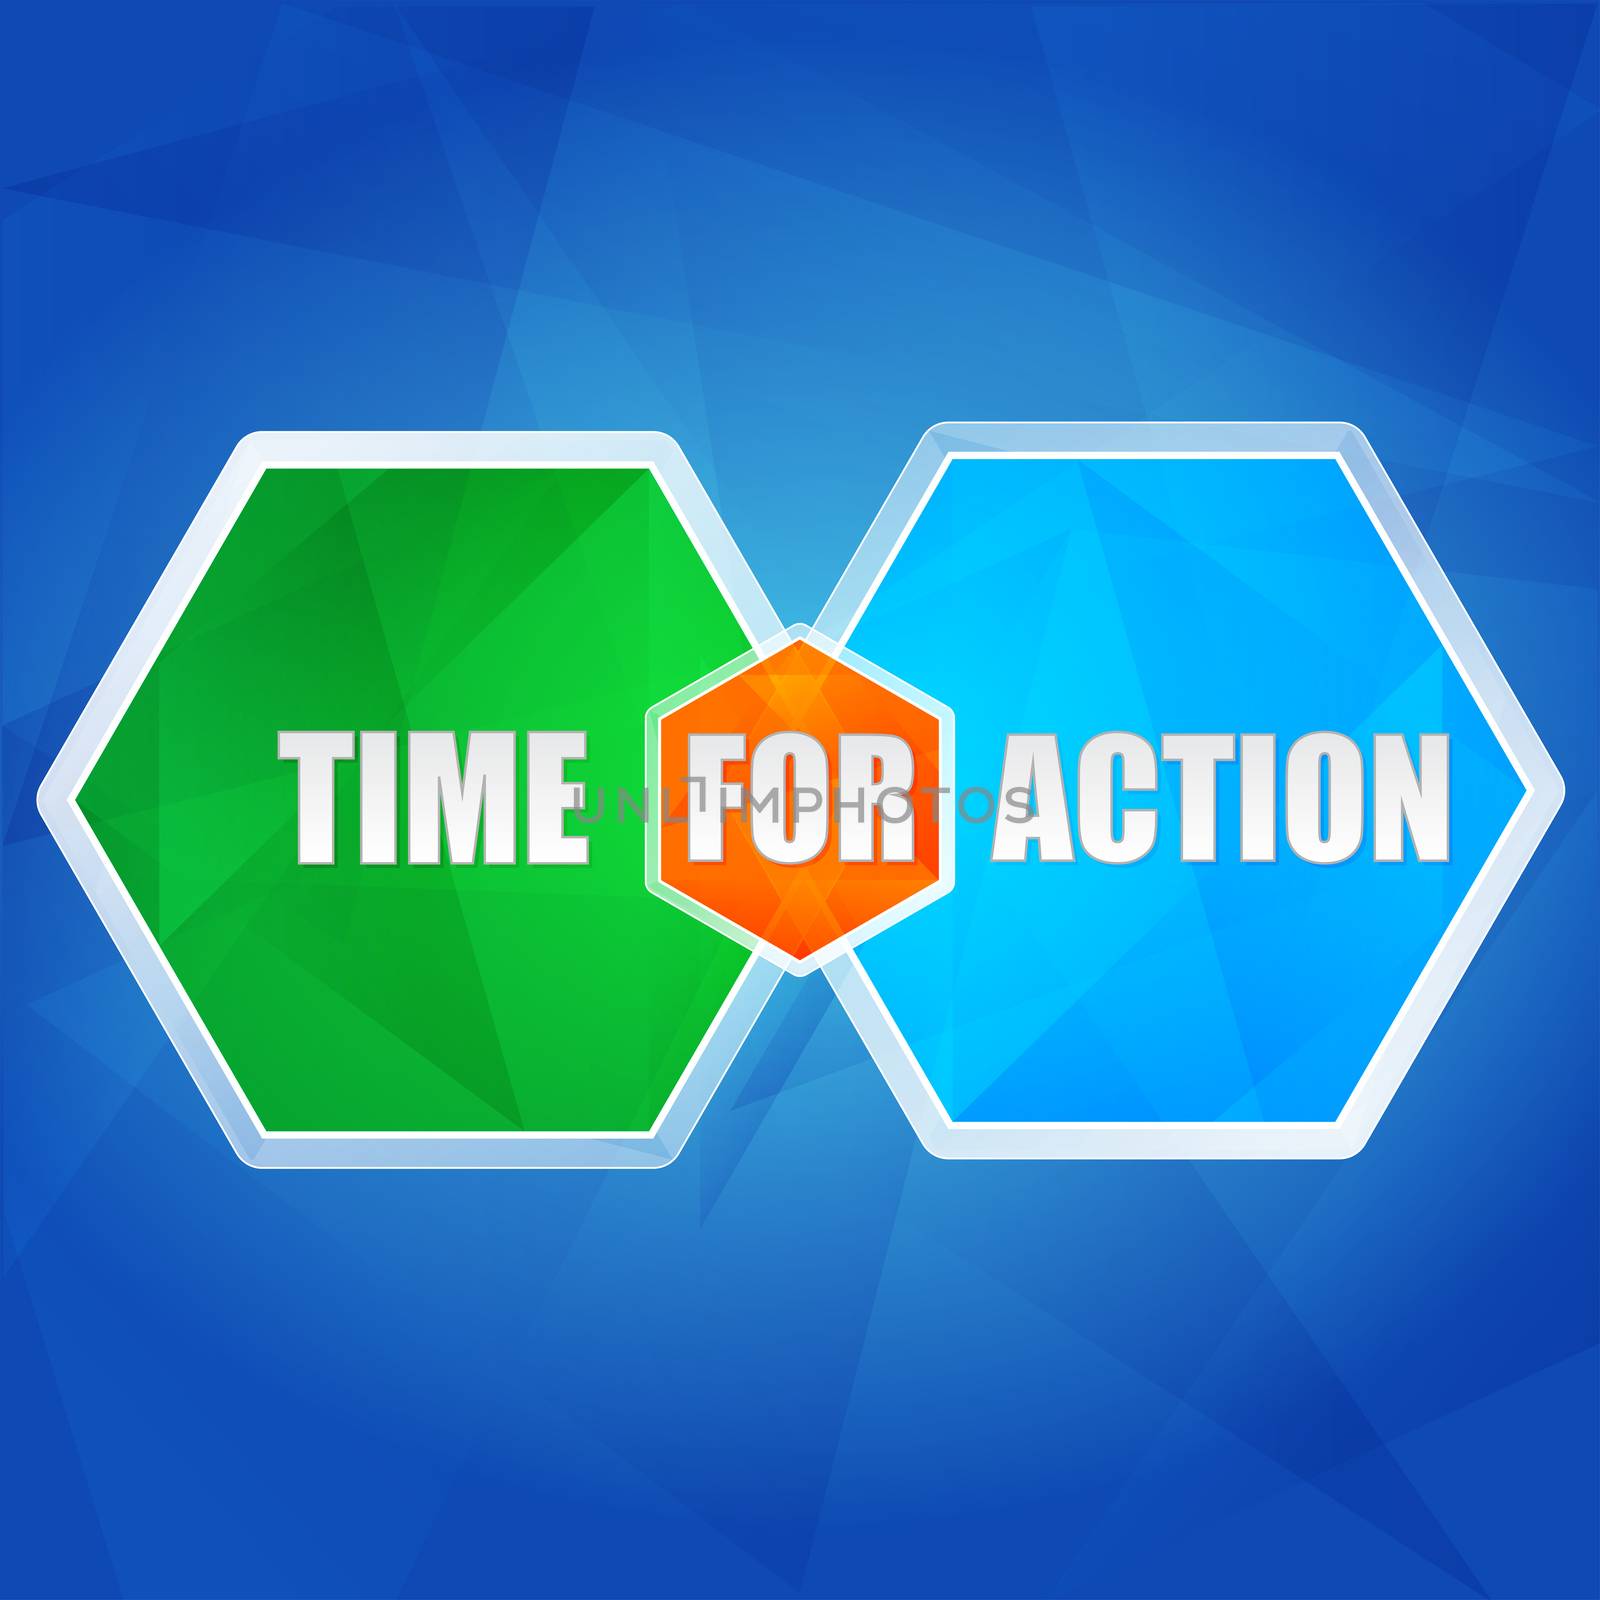 time for action - business motivation concept words in color hexagons over blue background, flat design